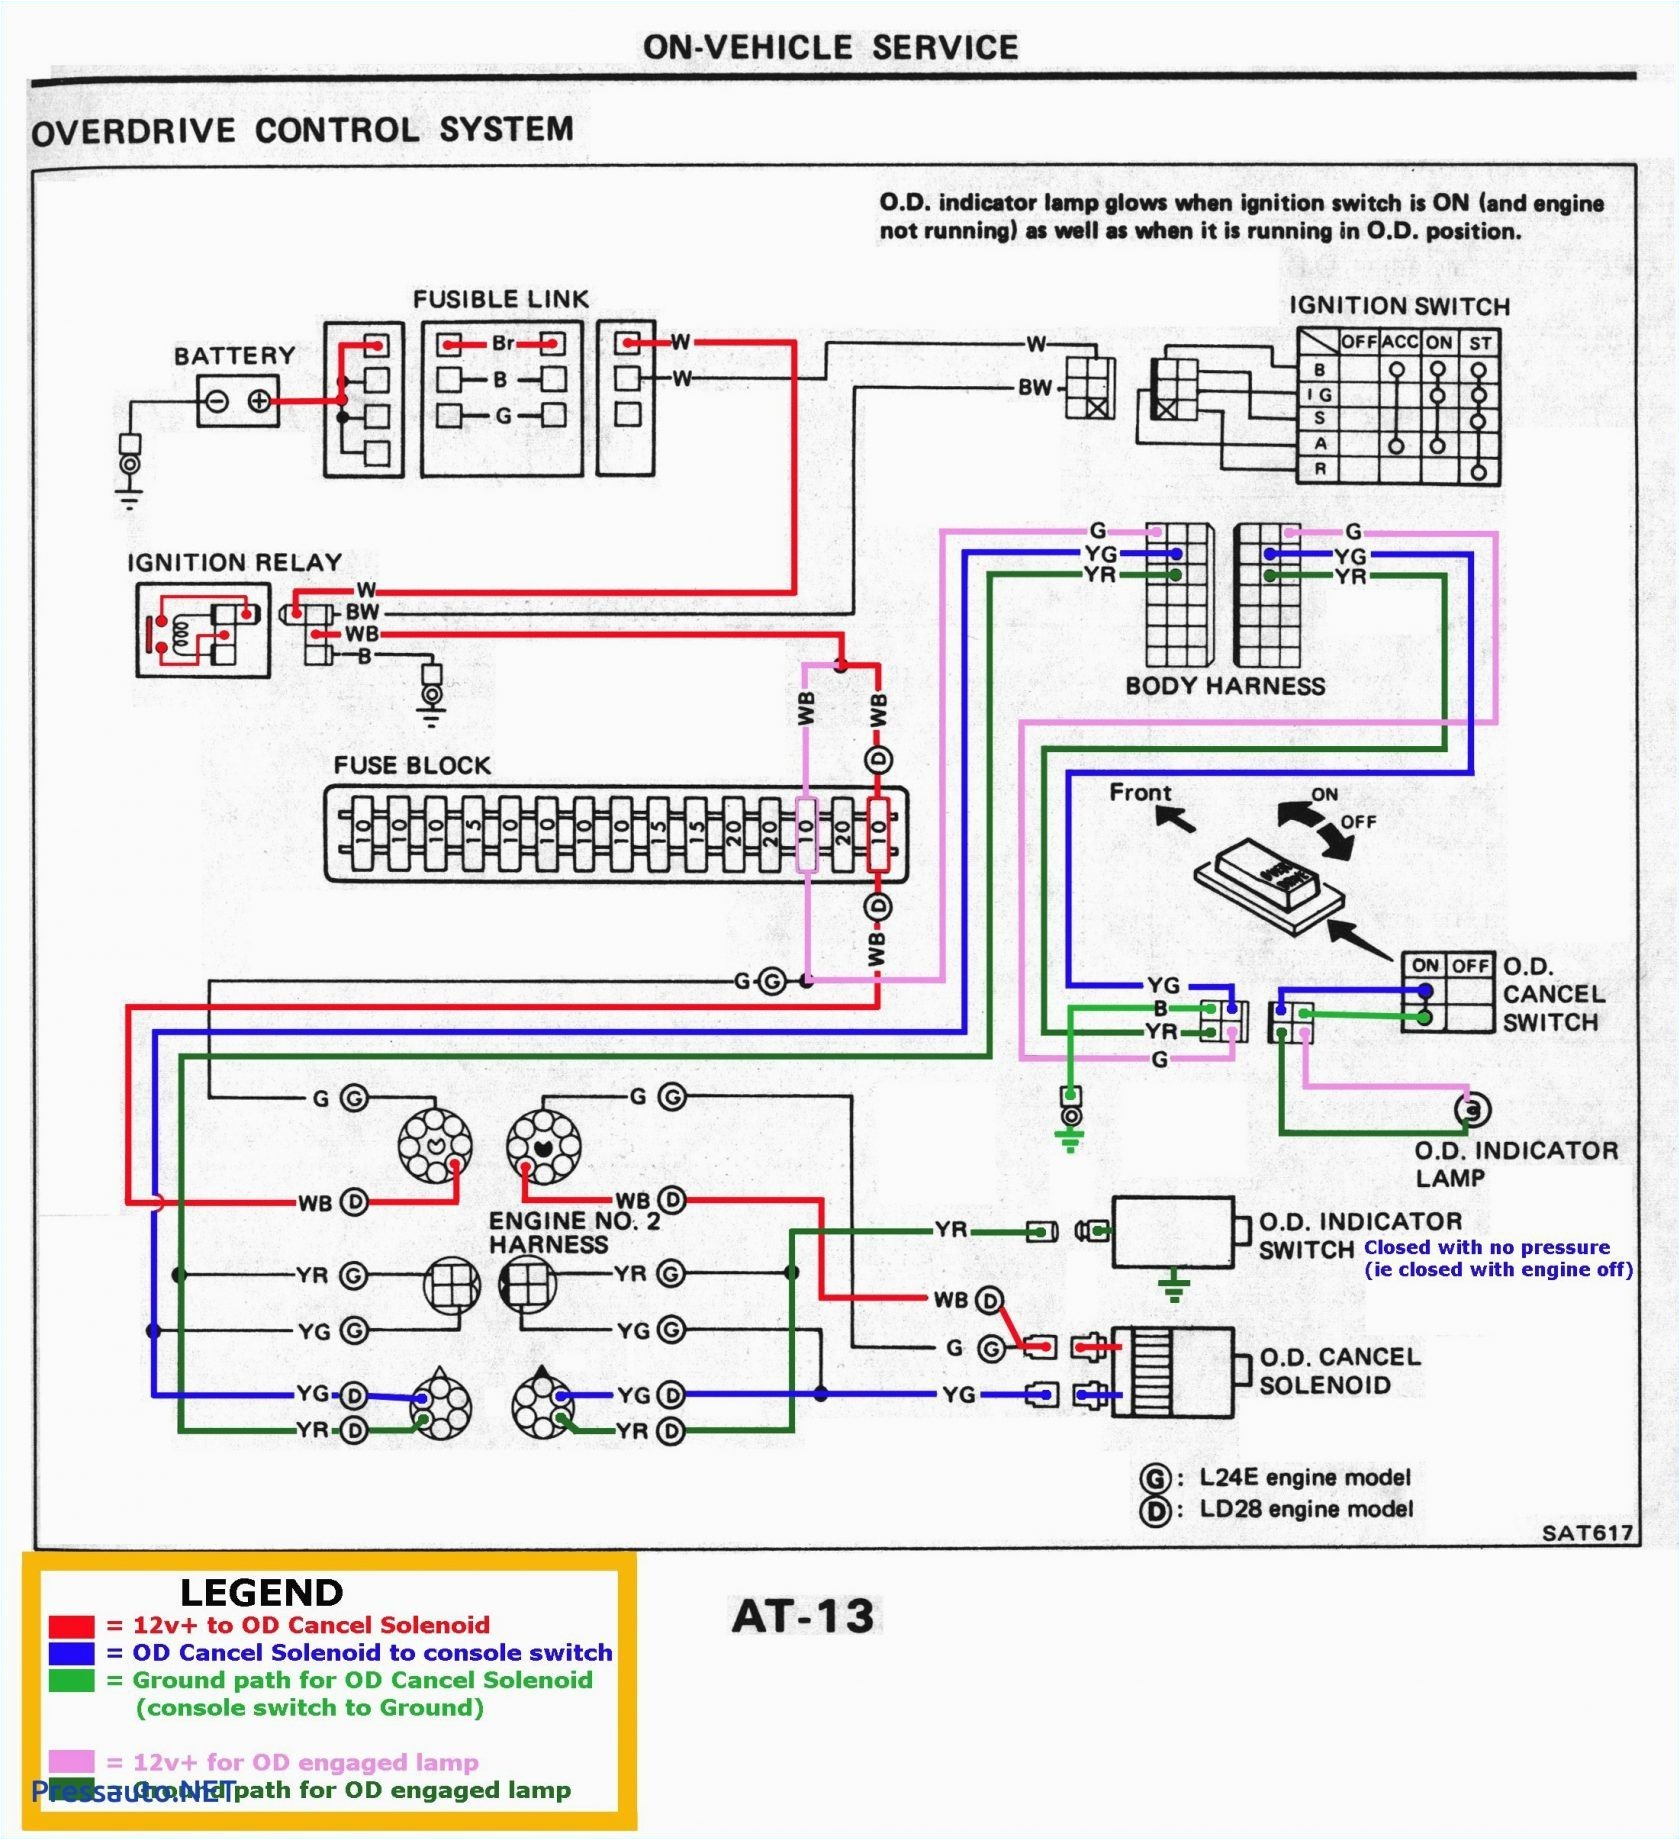 wiring product diagram carrier fa4anf024005aaaa electrical model wiring old diagrams carrier 48gs048115301 daily electronical wiring product